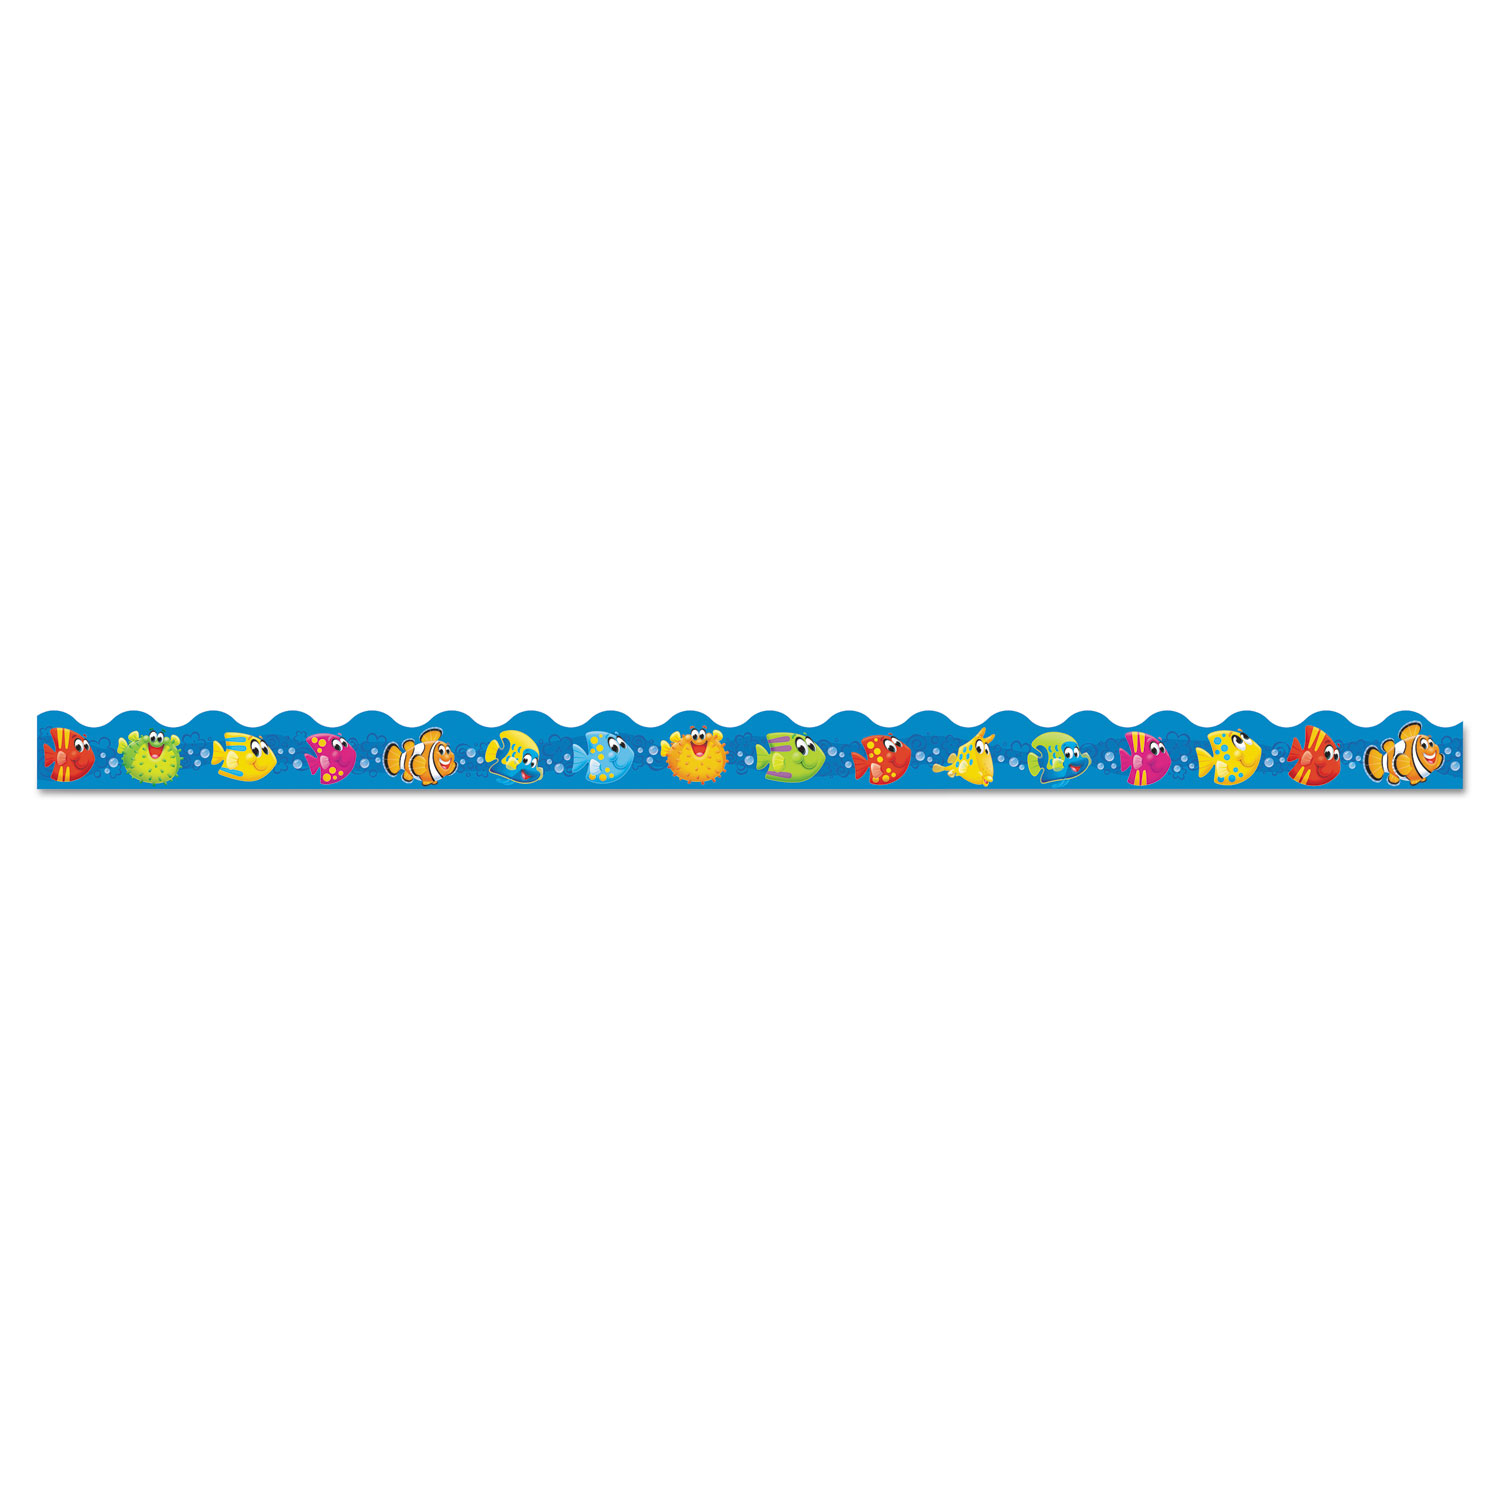 Bolder Borders and Terrific Trimmers, Sea Buddies, 2 1/4 x 39 ft